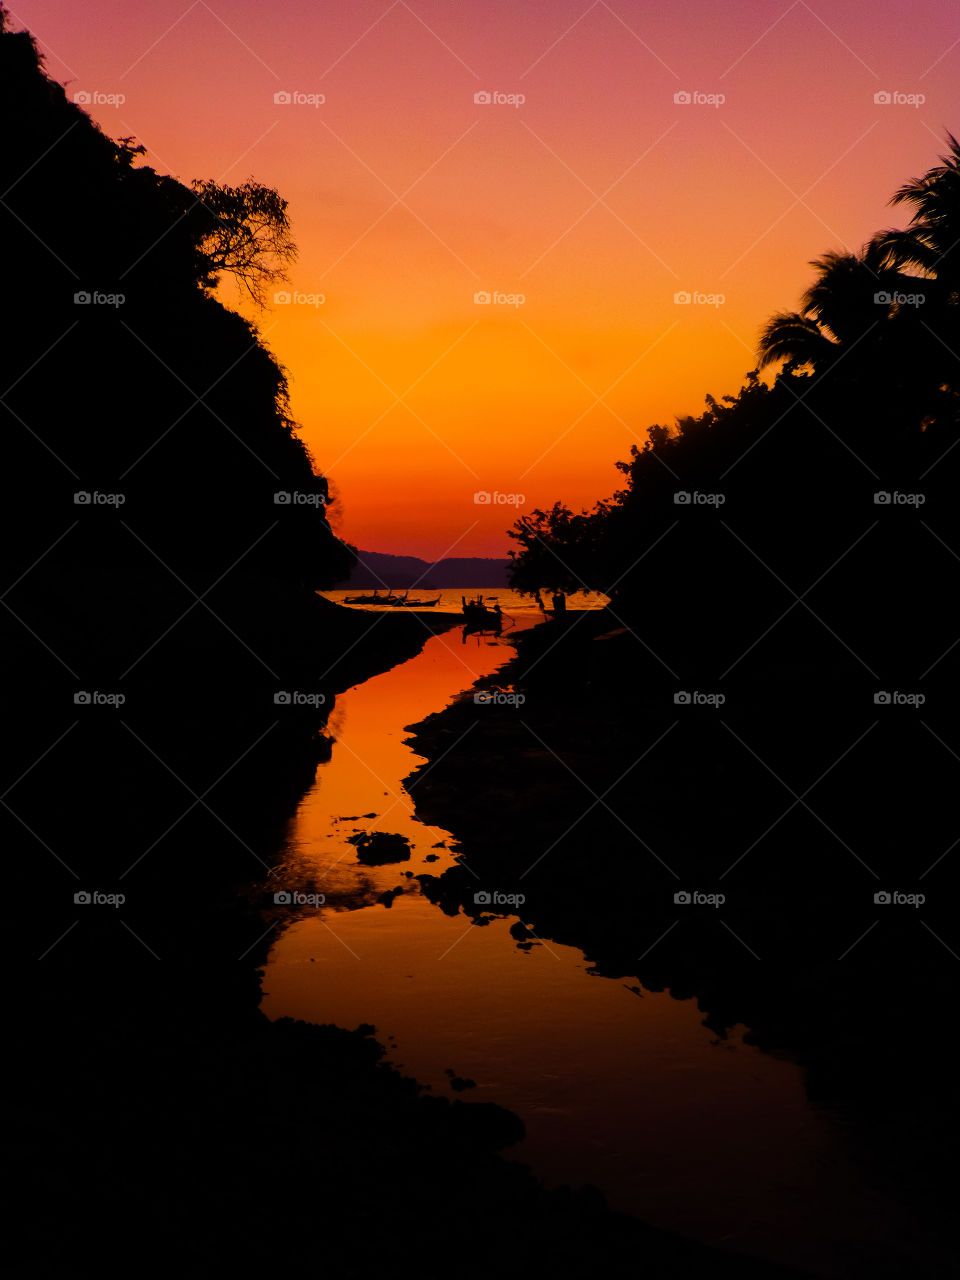 Sunset over a river bed in Thailand 